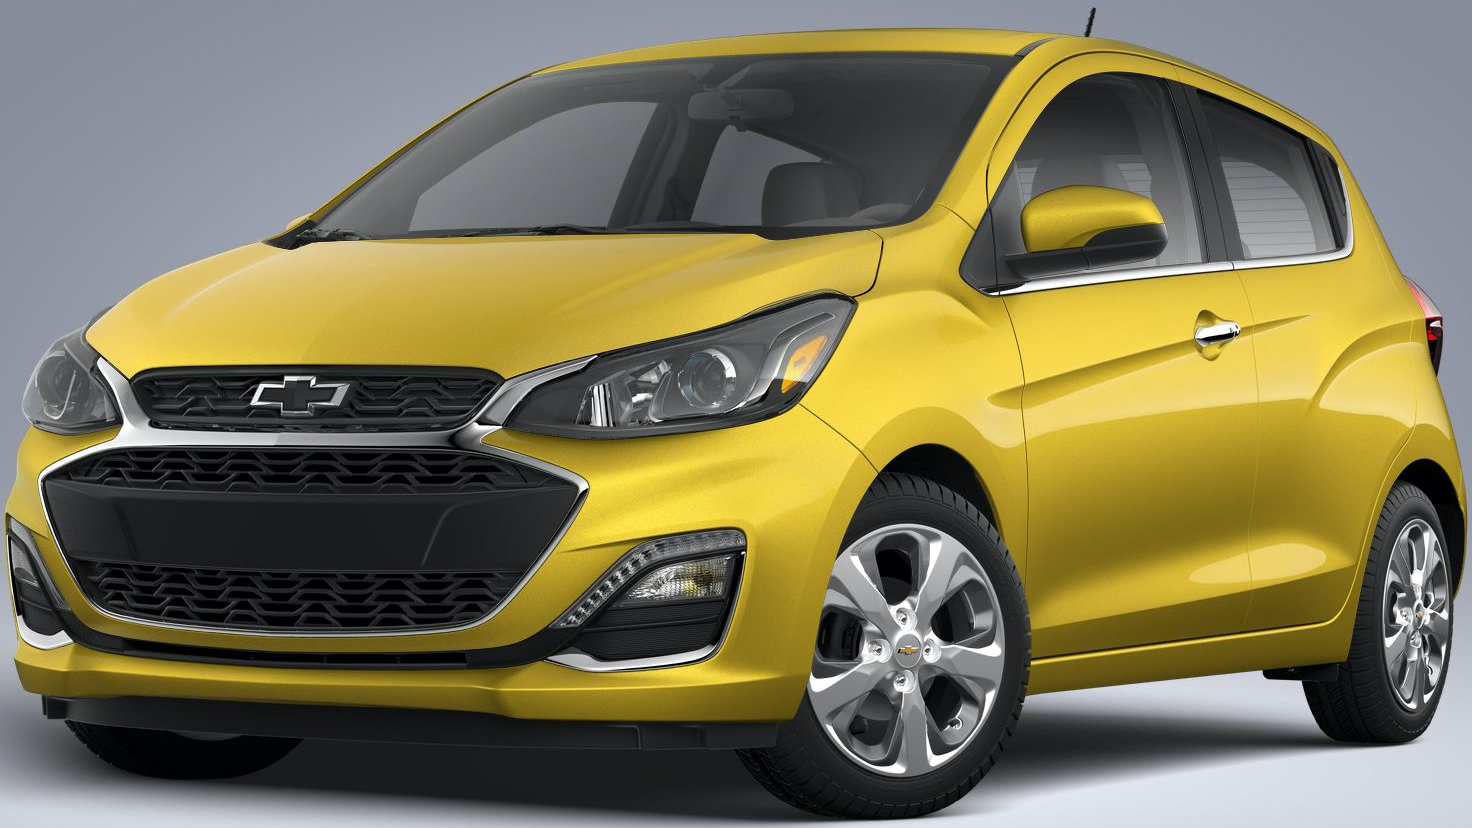 2022 Chevy Spark Gets New Nitro Yellow Color First Look